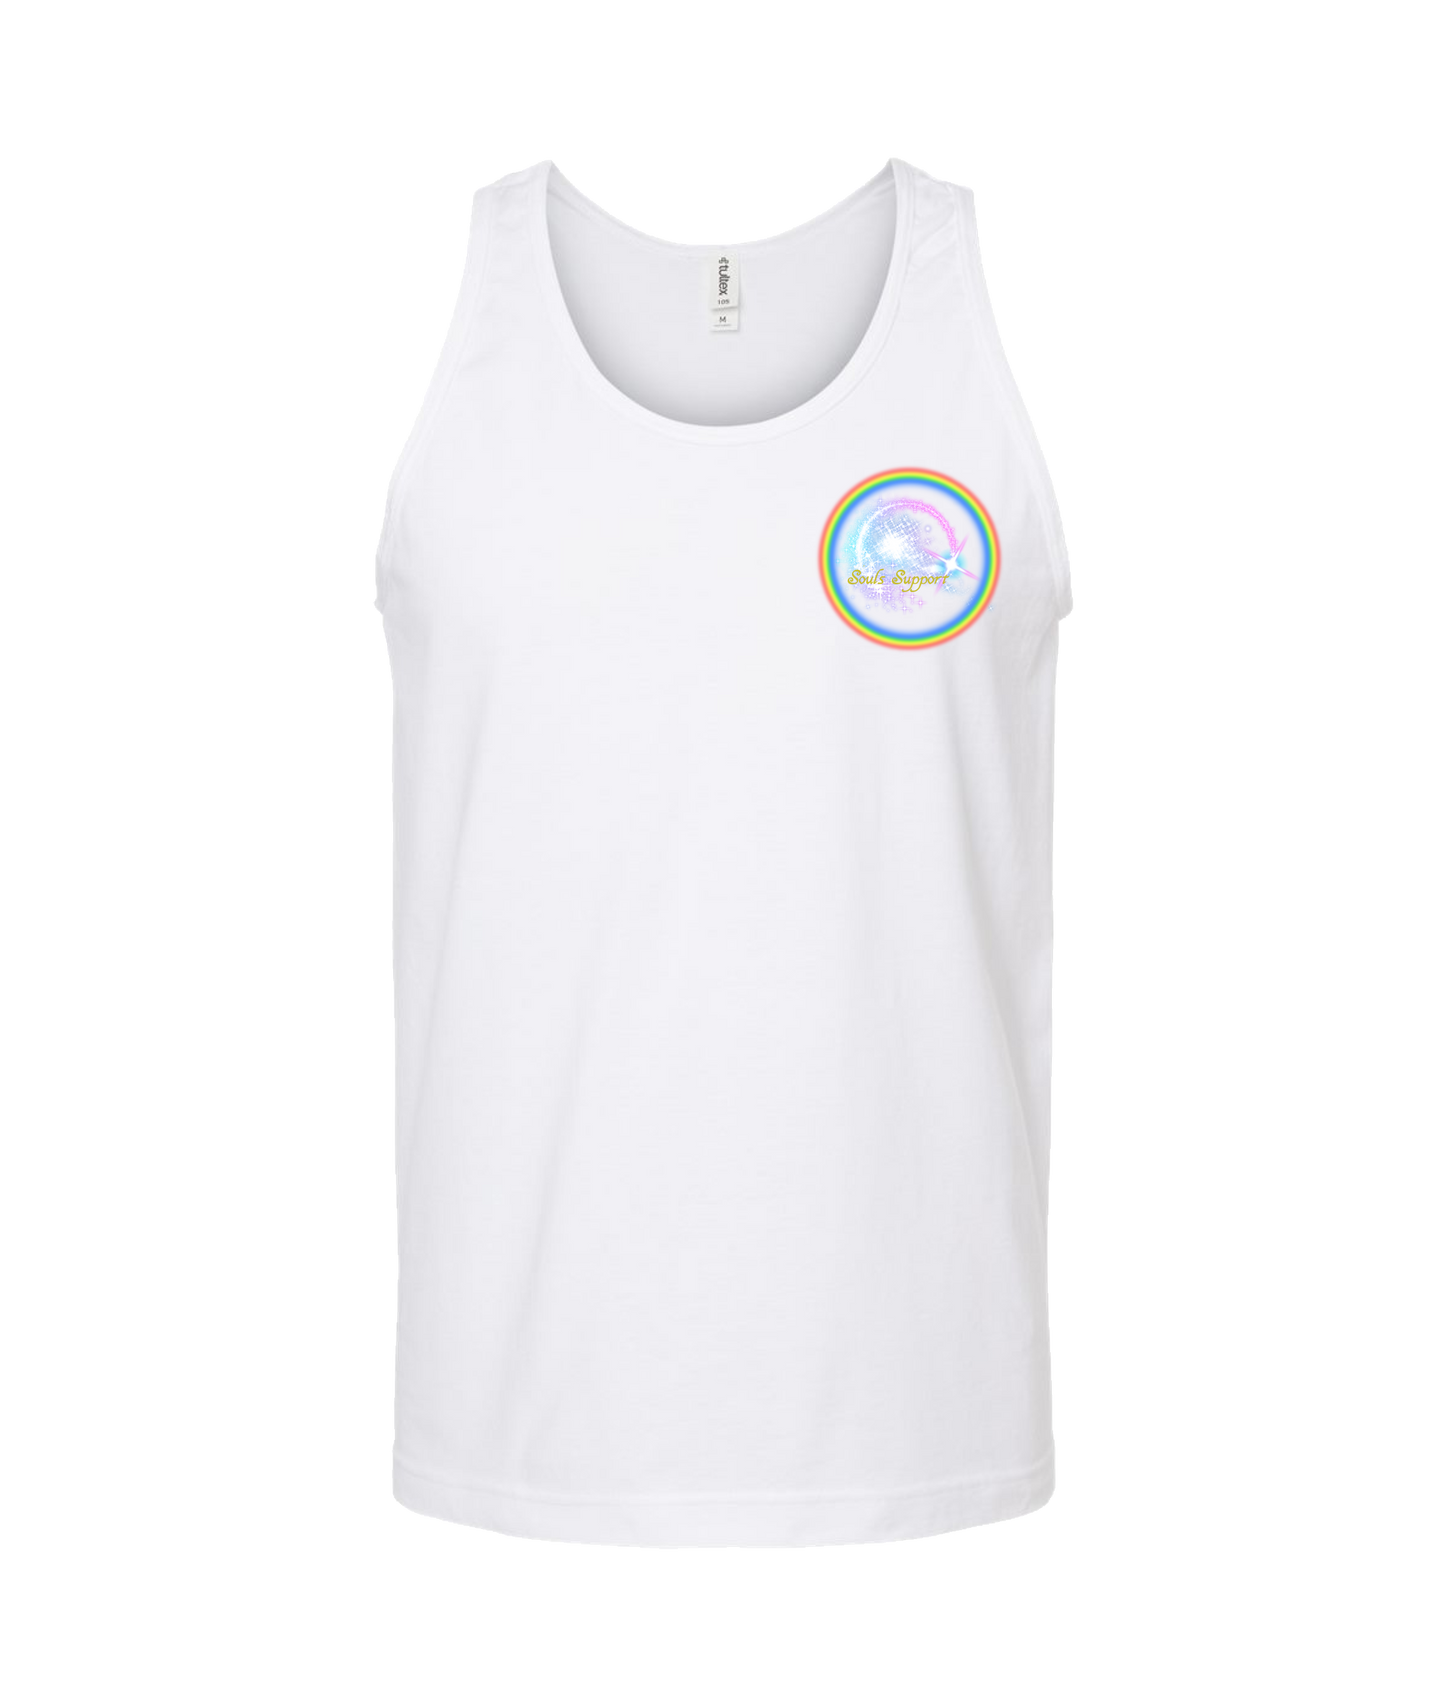 Souls Support - DESIGN 1 - White Tank Top